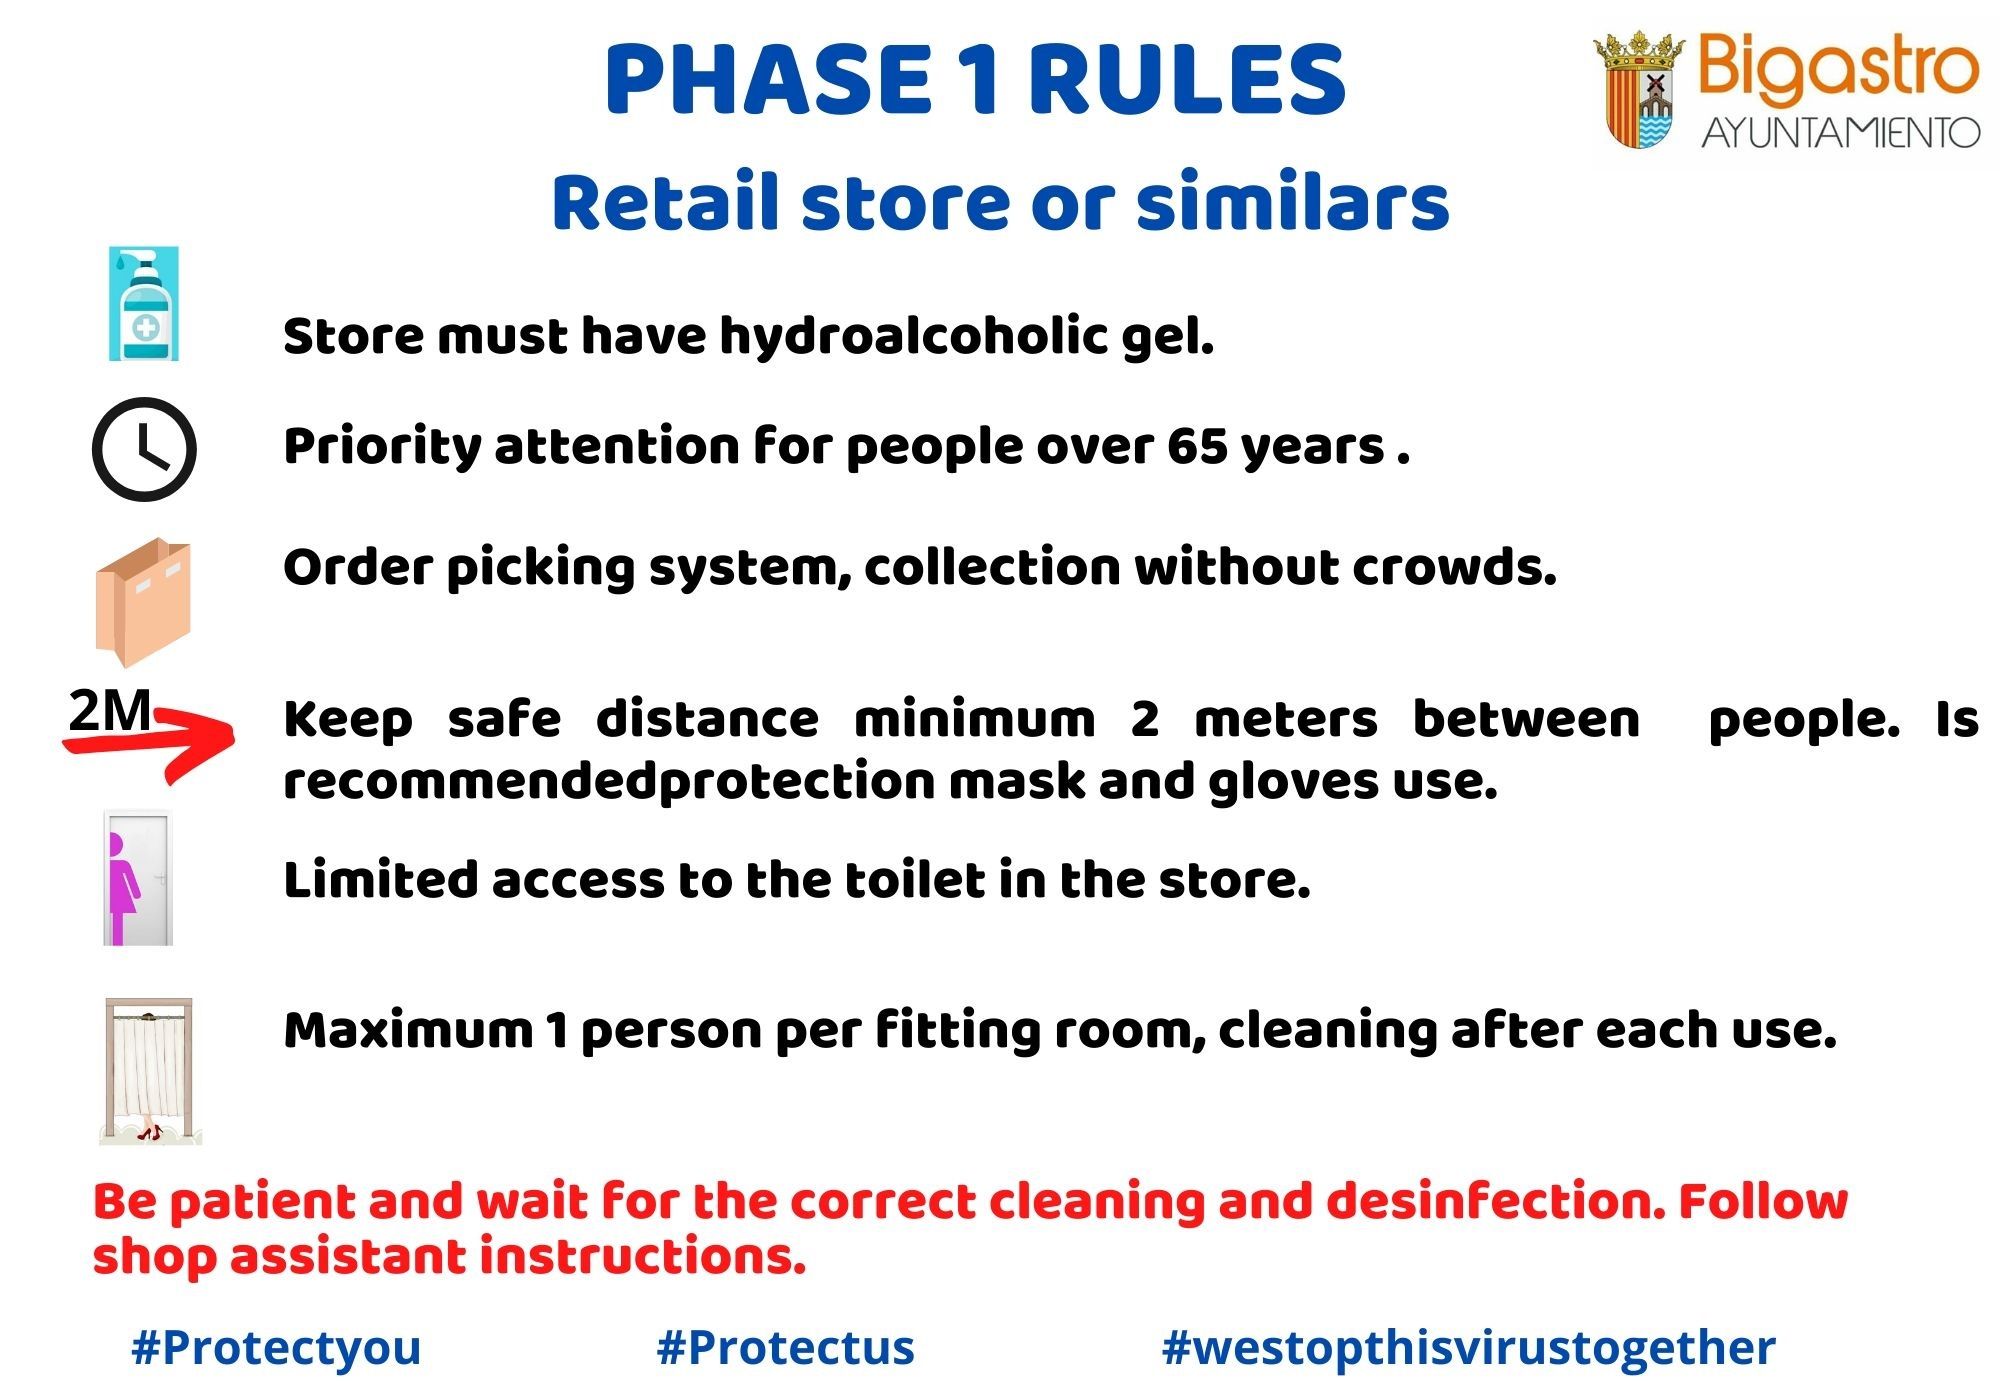 Phase 1 rules, retail stores and similars